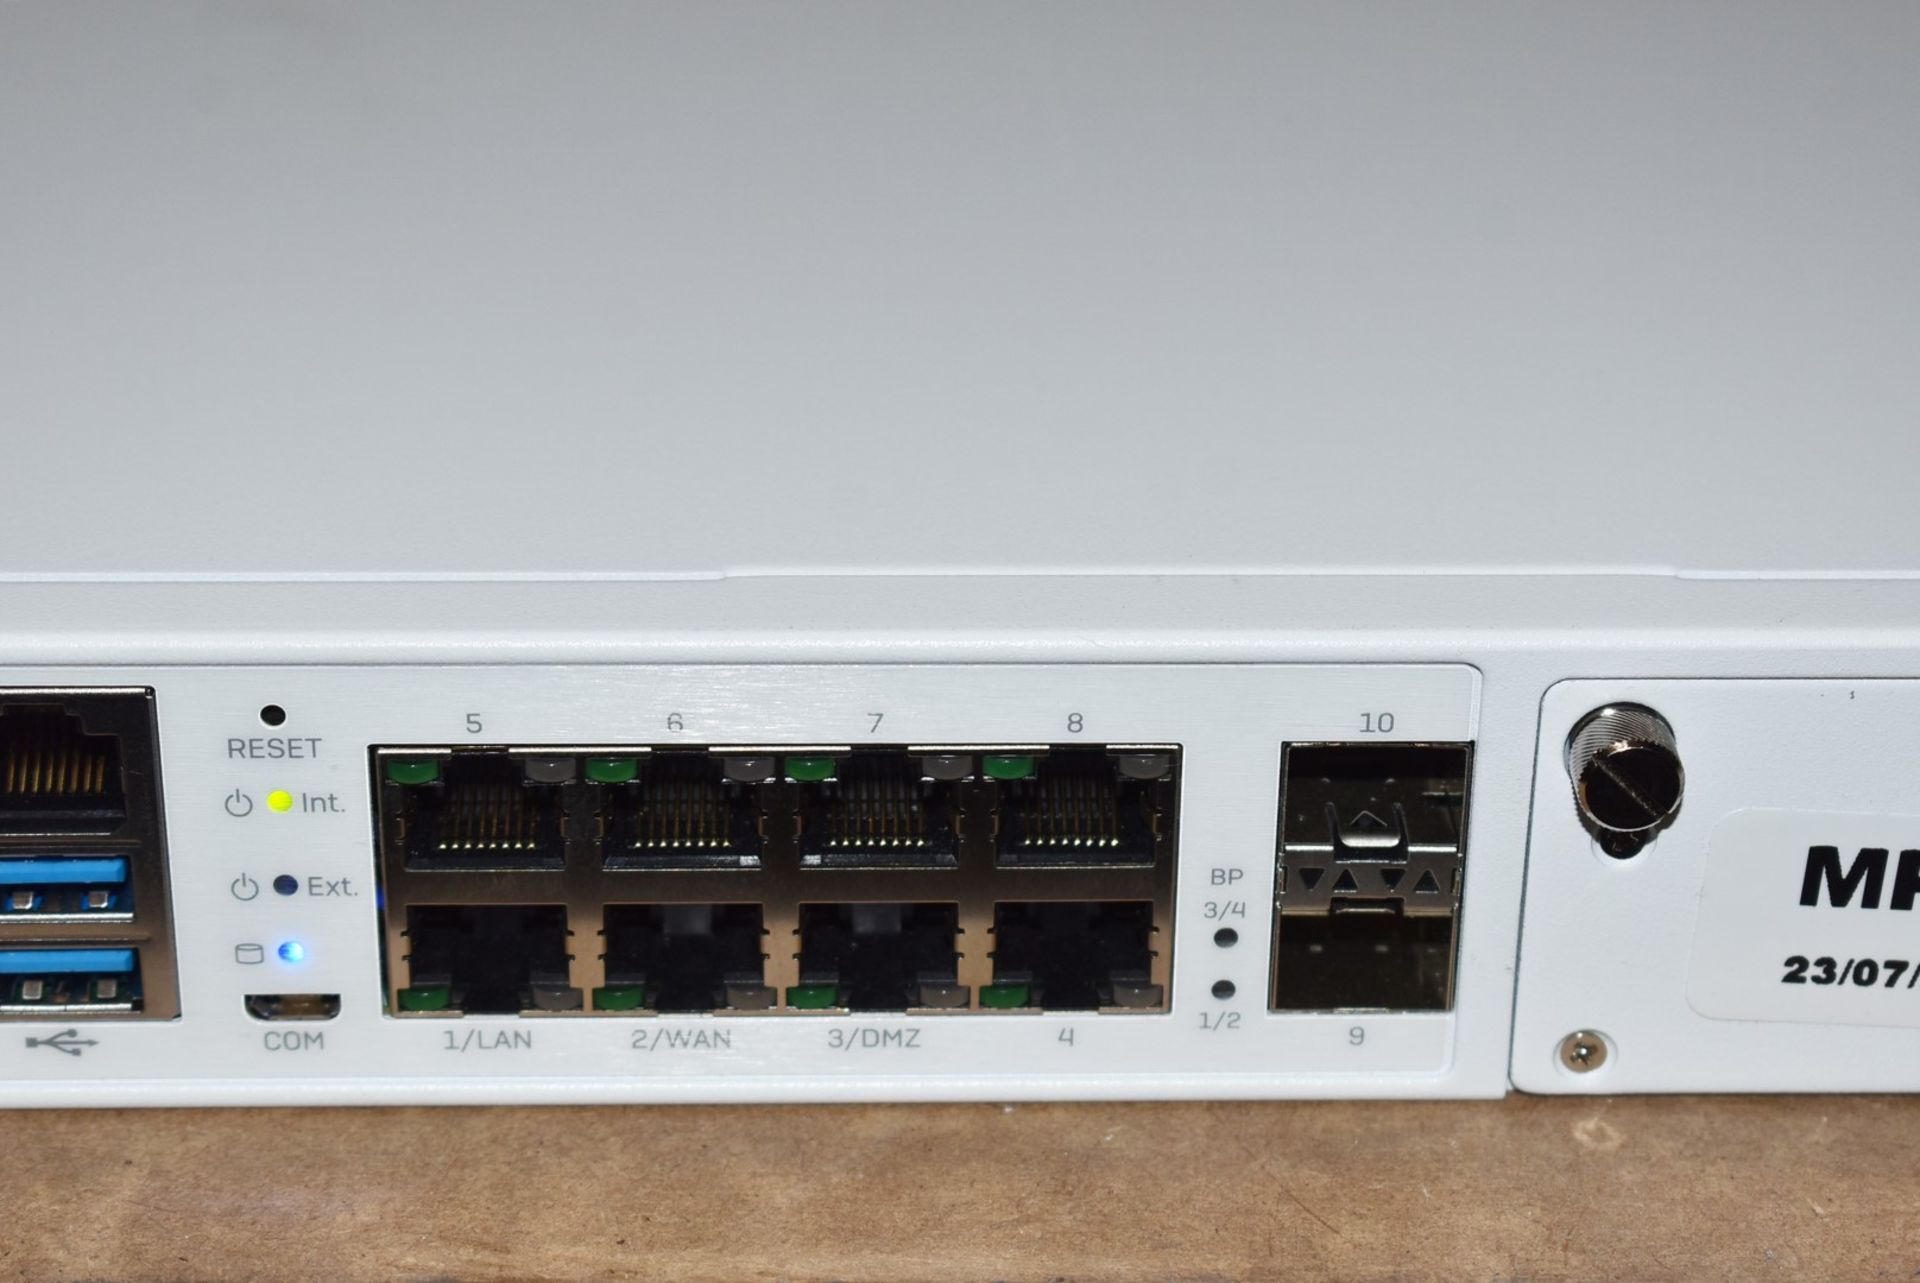 1 x Sophos XG430 Edge Firewall Appliance - Rev2 - Manufactured Jan 2019 - Includes Power Cable - - Image 5 of 11